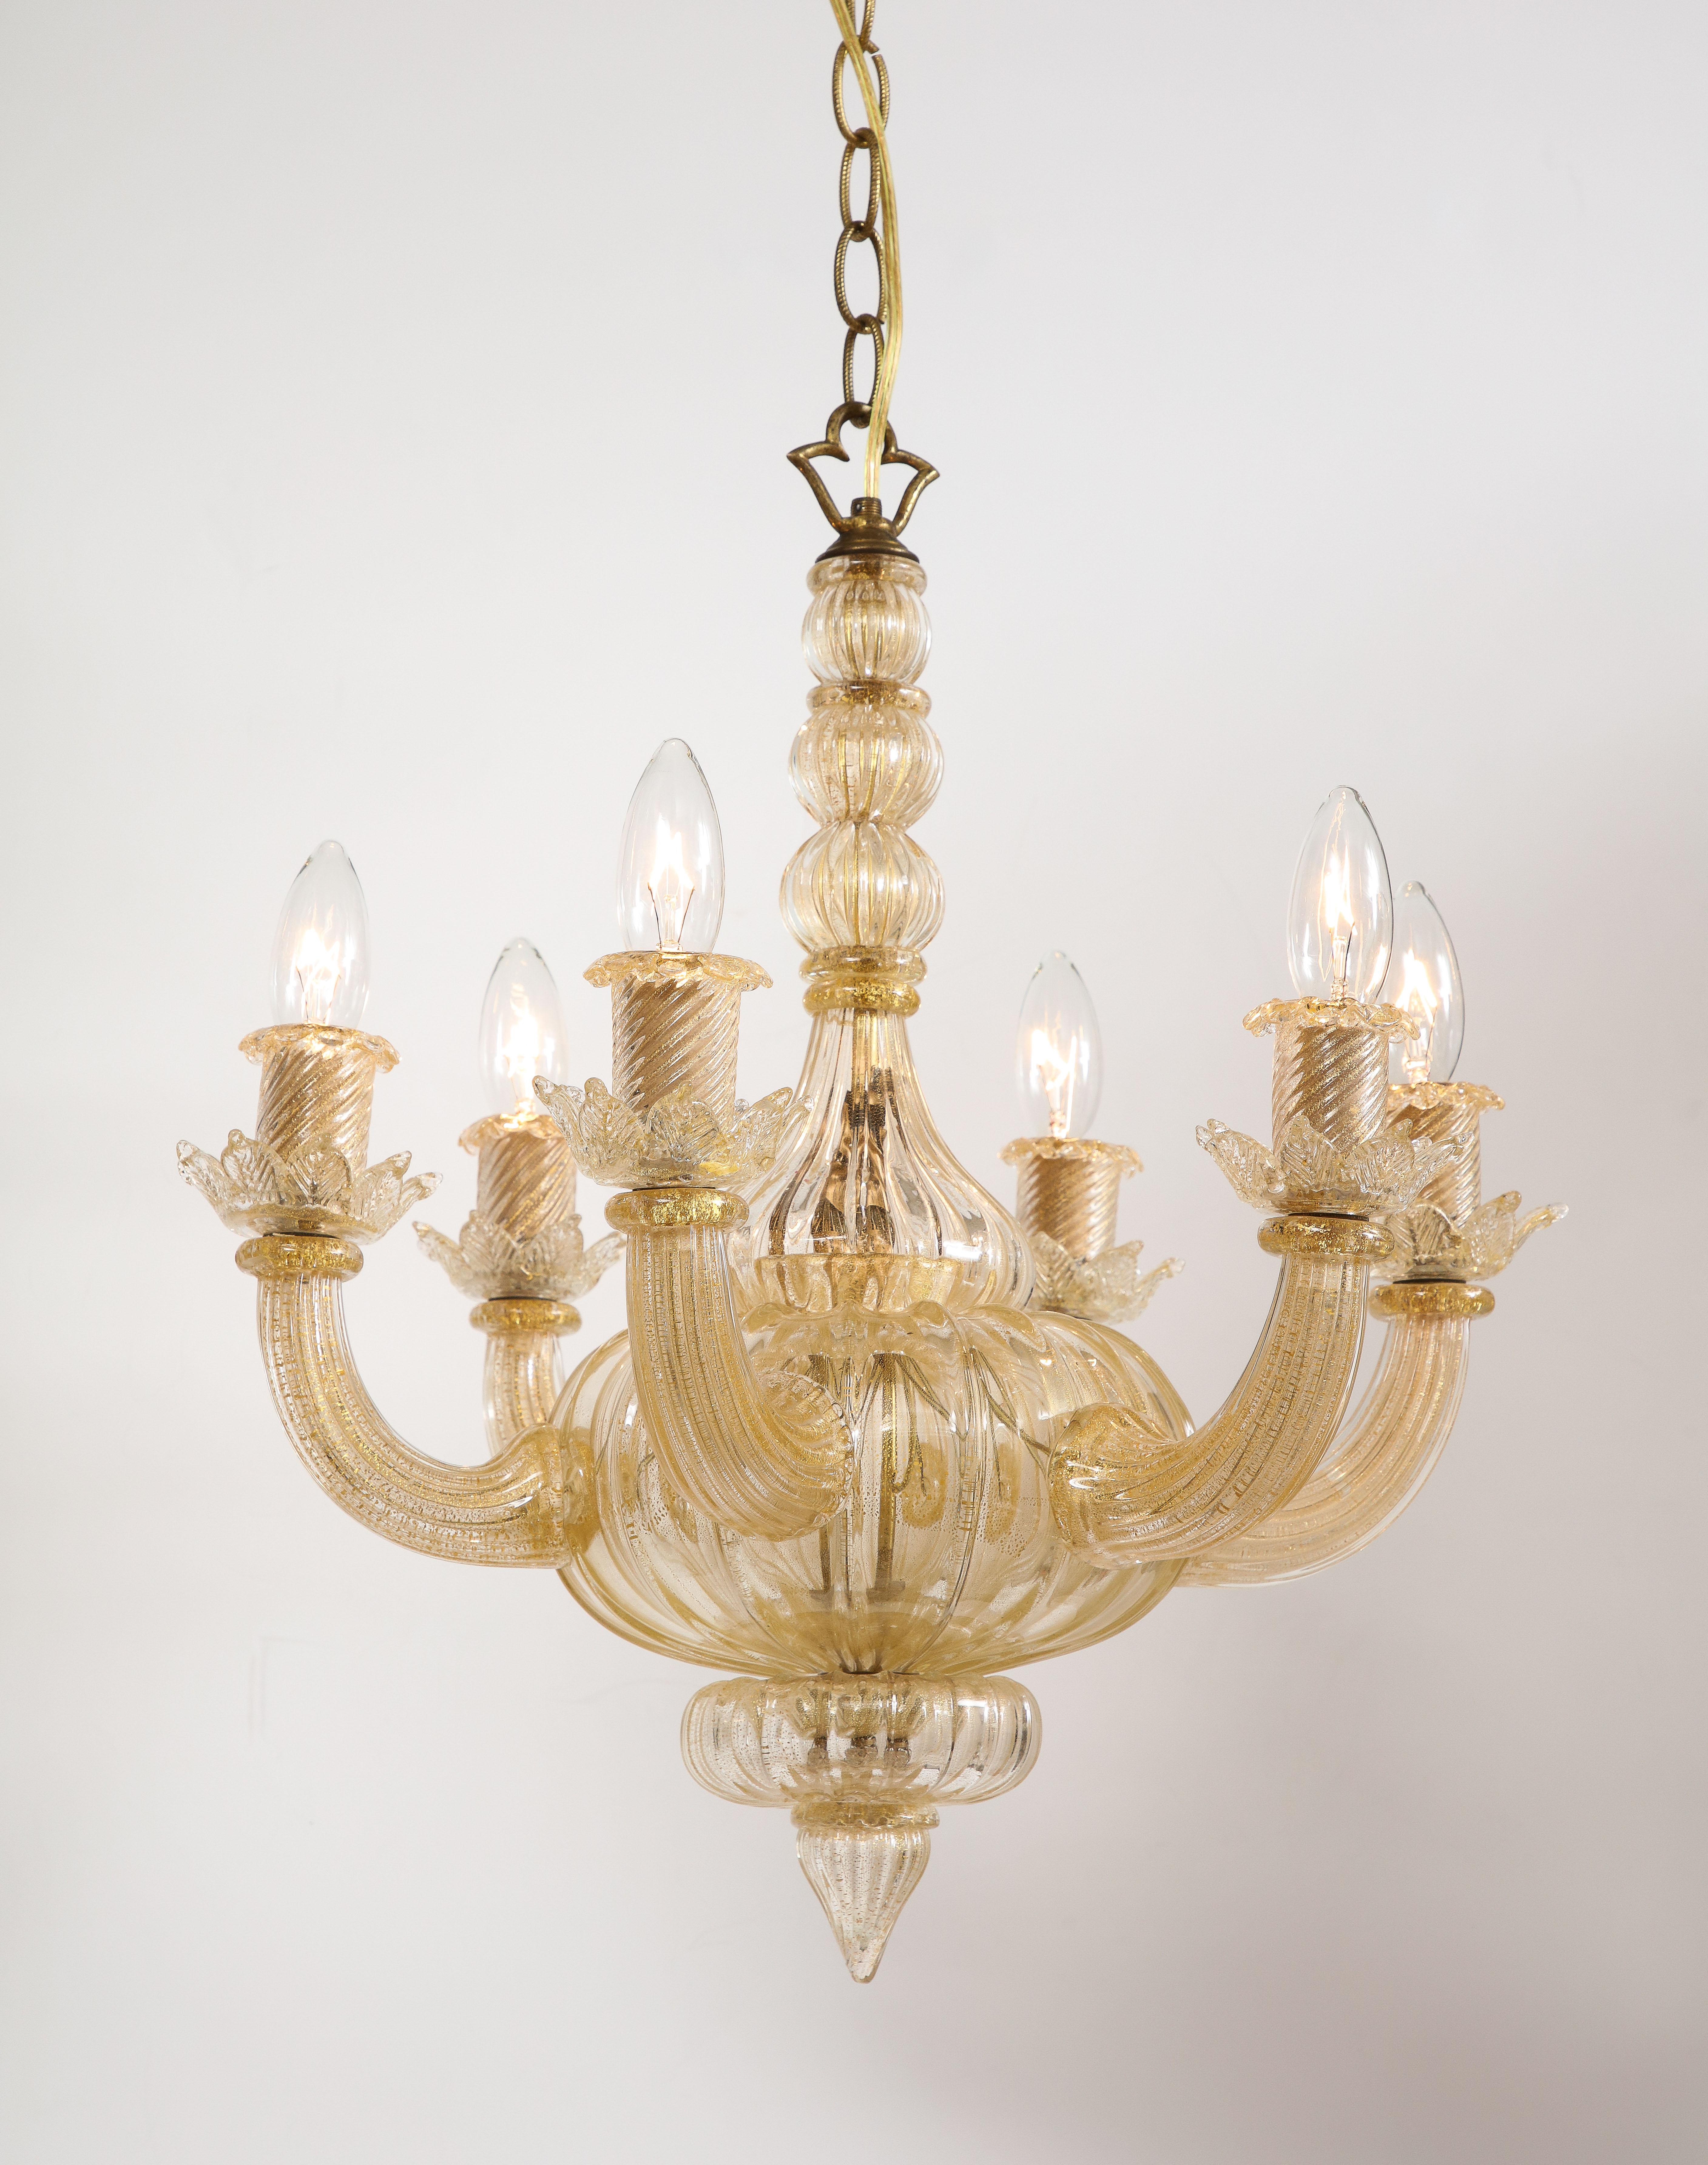 Blown Glass Gold Italian Murano Midcentury 6 Arm Neoclassical Style Chandelier For Sale